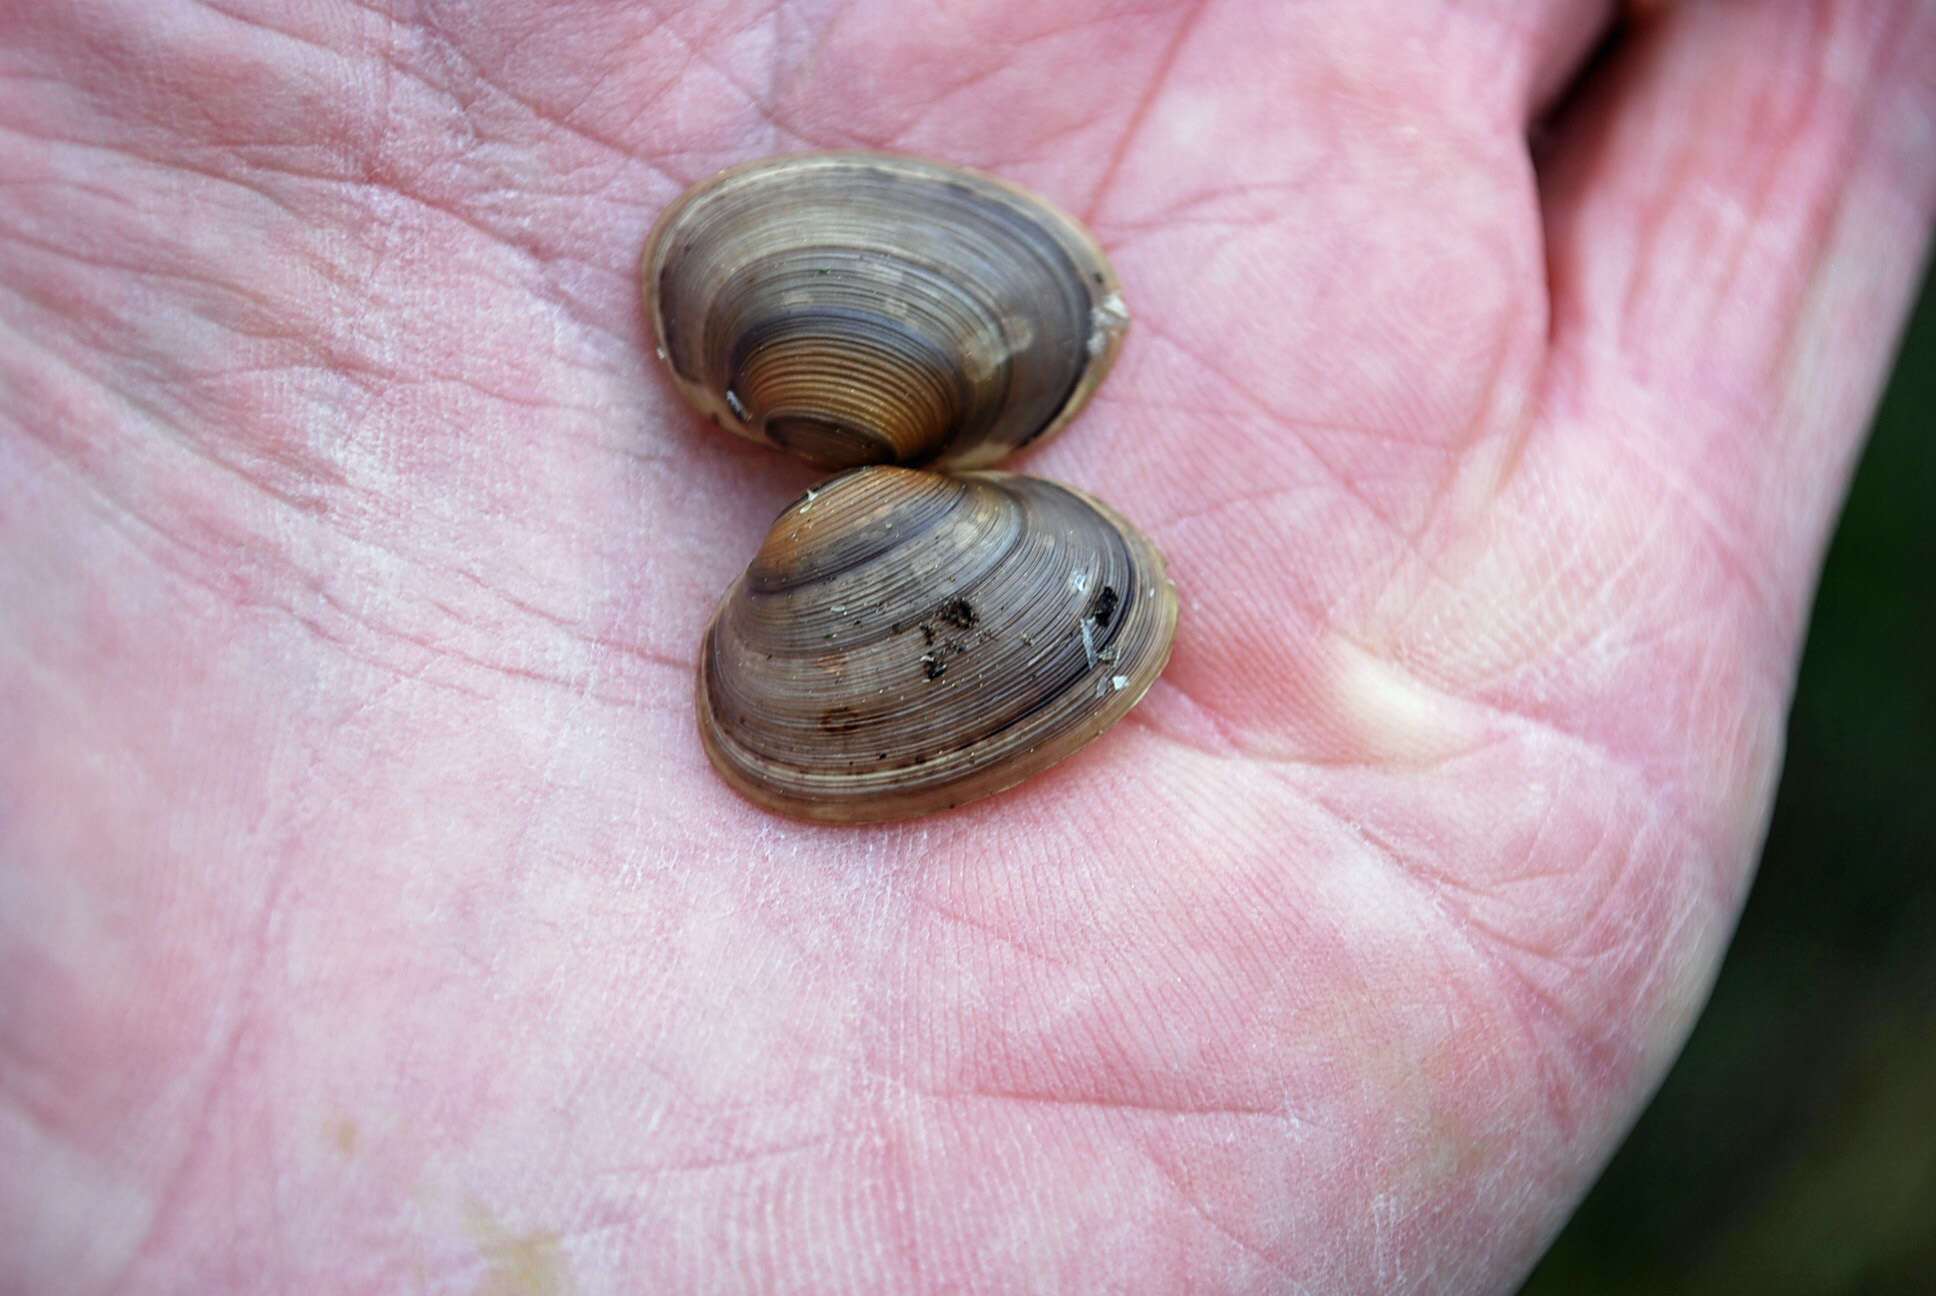 Image of Grooved Fingernail Clam